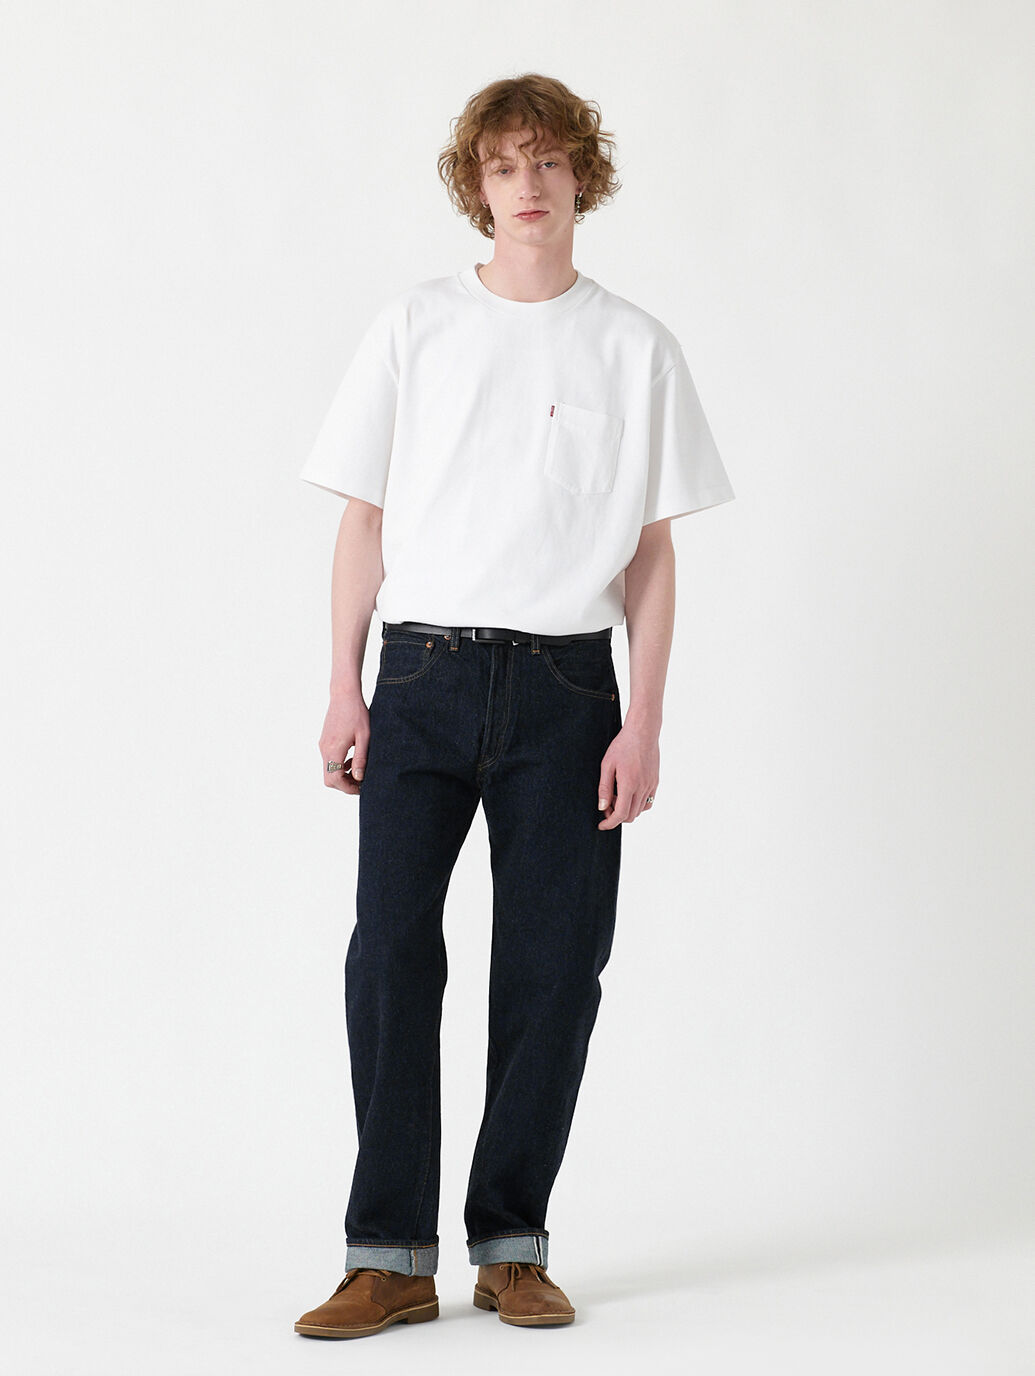 LEVI'S® VINTAGE CLOTHING 1955モデル 501® JEANS NEW RINSE｜リーバイス® 公式通販